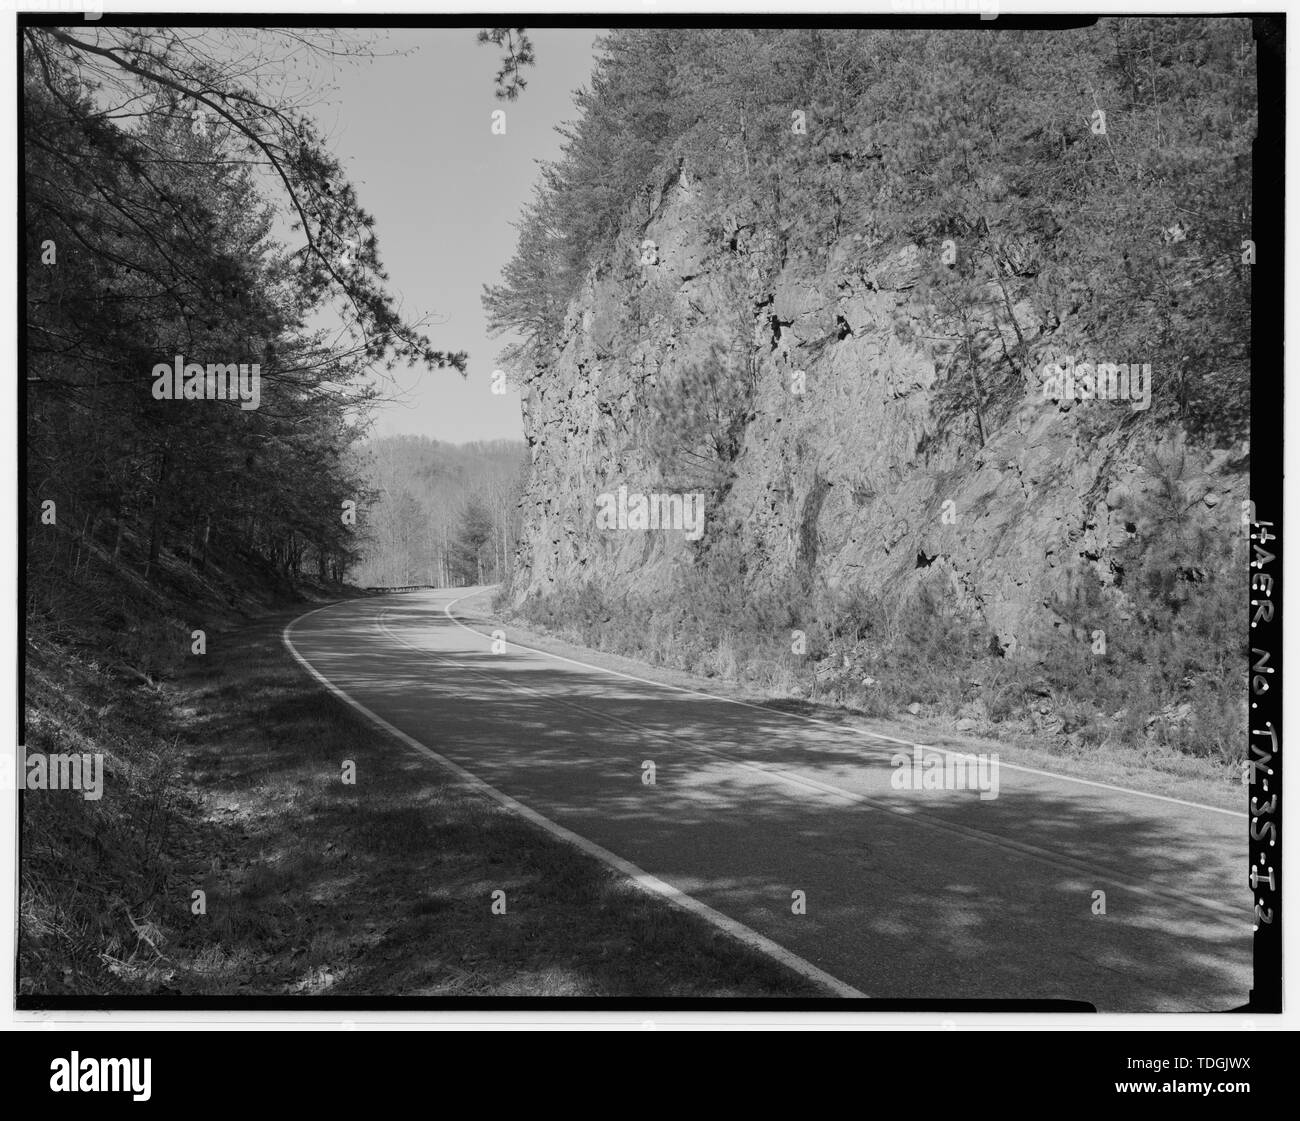 Northshore Road, view of rock cut along road. - Great Smoky Mountains National Park Roads and Bridges, Northshore Road, 1 mile spur at Fontana Dam and Bryson City to Noland Creek, Gatlinburg, Sevier County, TN; Bureau of Public Roads; Tennessee Valley Authority; US Army Corps of Engineers; E W Grannis Company; W B Dillard Construction Company; H F Ramsey Company; Fry, George; Udall, Stewart; Hartzog, George; Cowin and Company; Troitino and Brown Construction Company; Sasser, Jim; Helms, Jesse; Lupyak, Edward, field team project manager; Great Smoky Mountains National Park, sponsor; National Pa Stock Photo